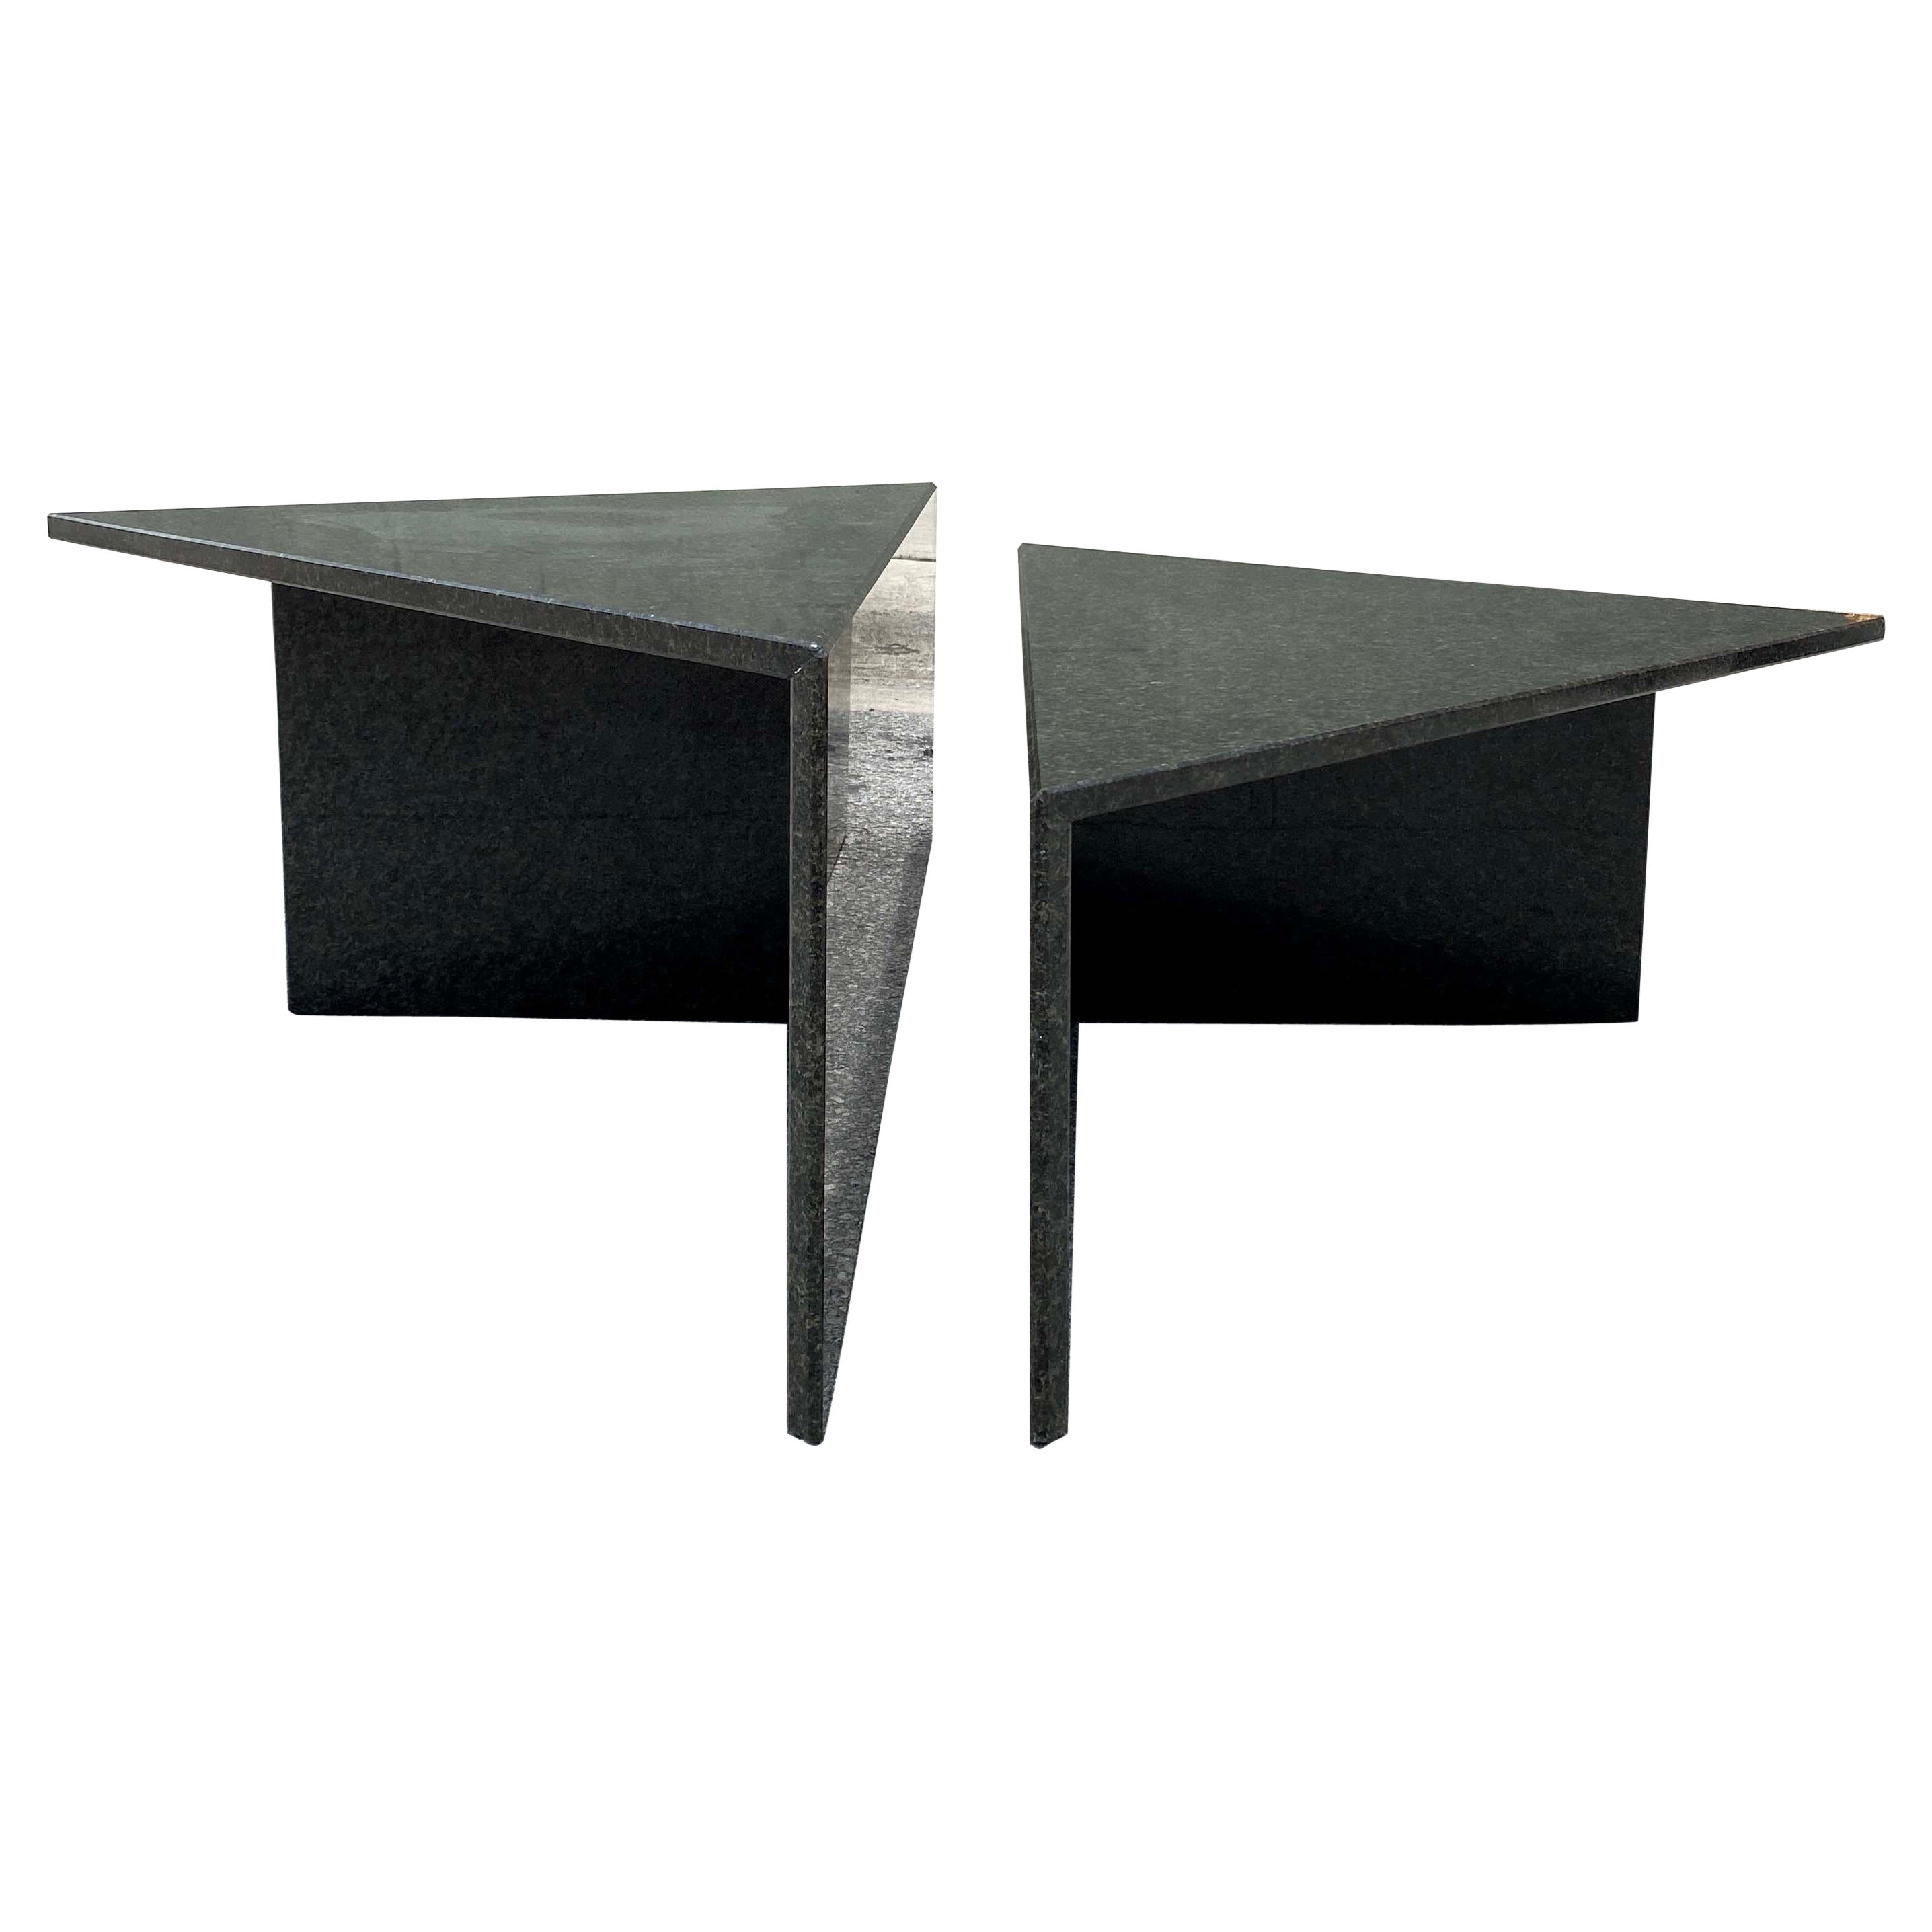 1970s Vintage Tiered Triangle Post Black Granite Coffee Table, 2 Pieces For Sale